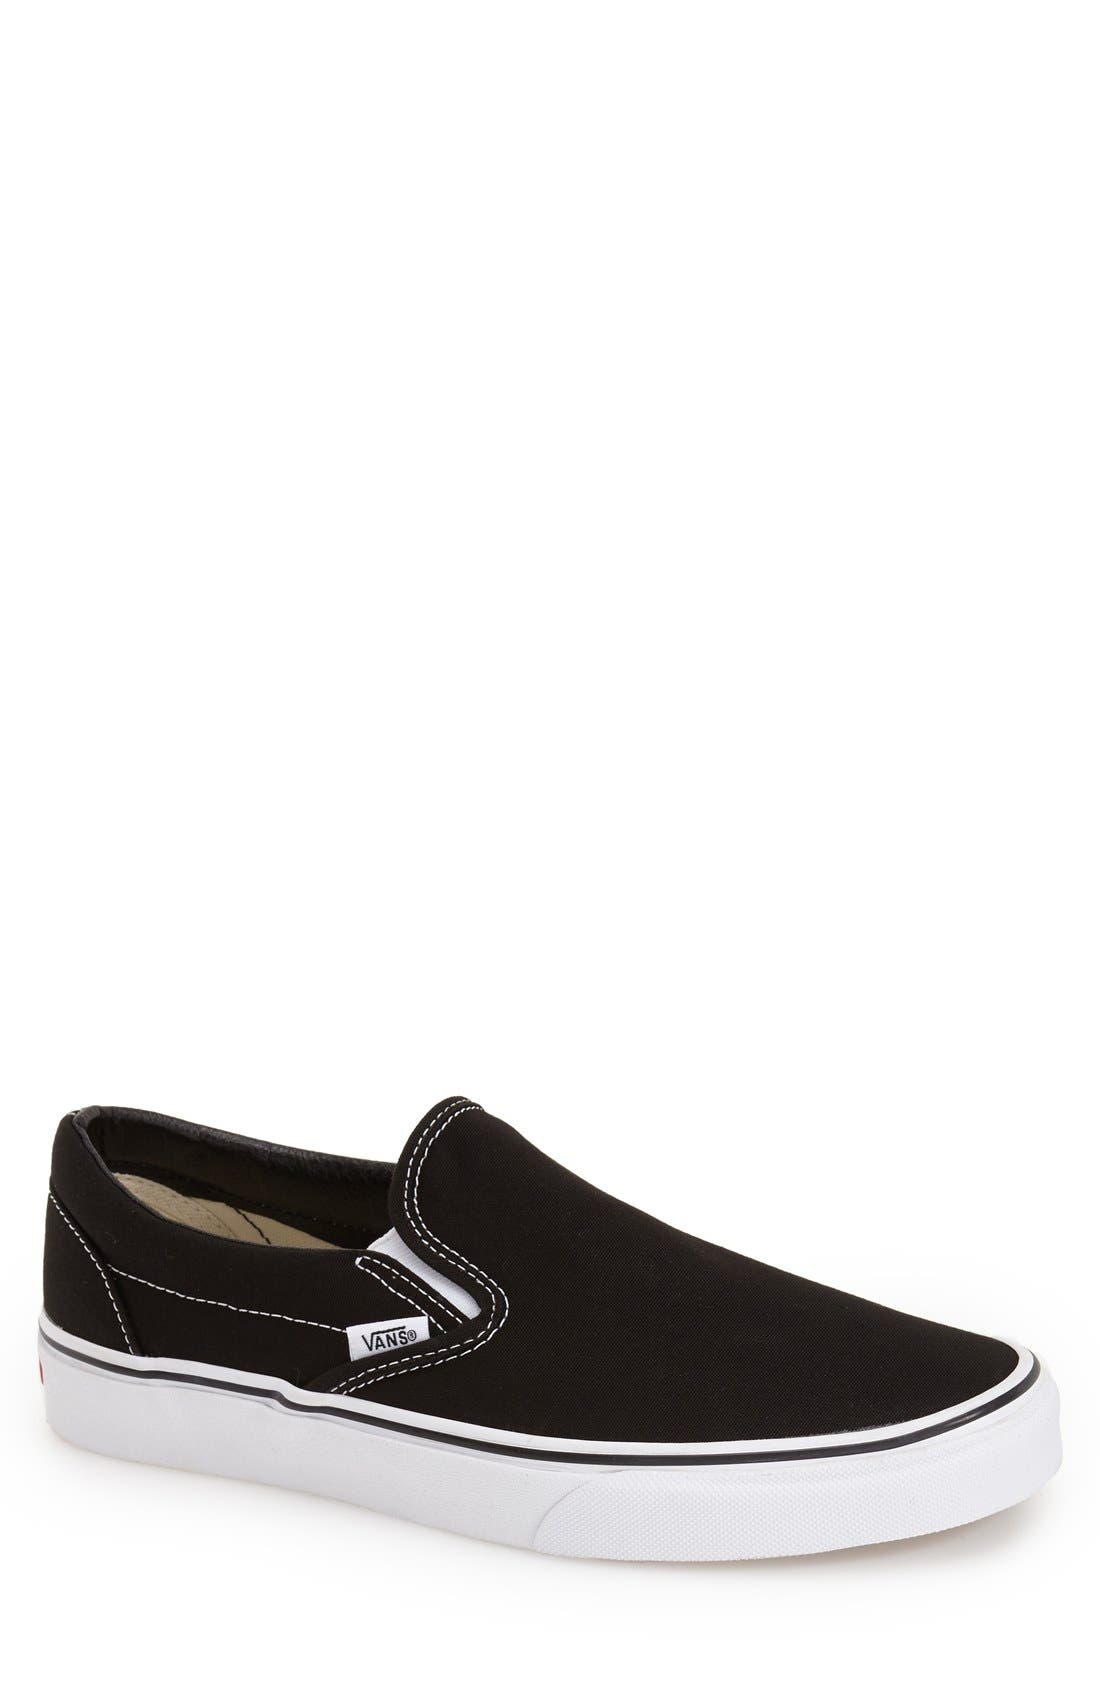 Shoes Low Shoes Slip-on Shoes Hush Puppies Slip-on Shoes themed print casual look 